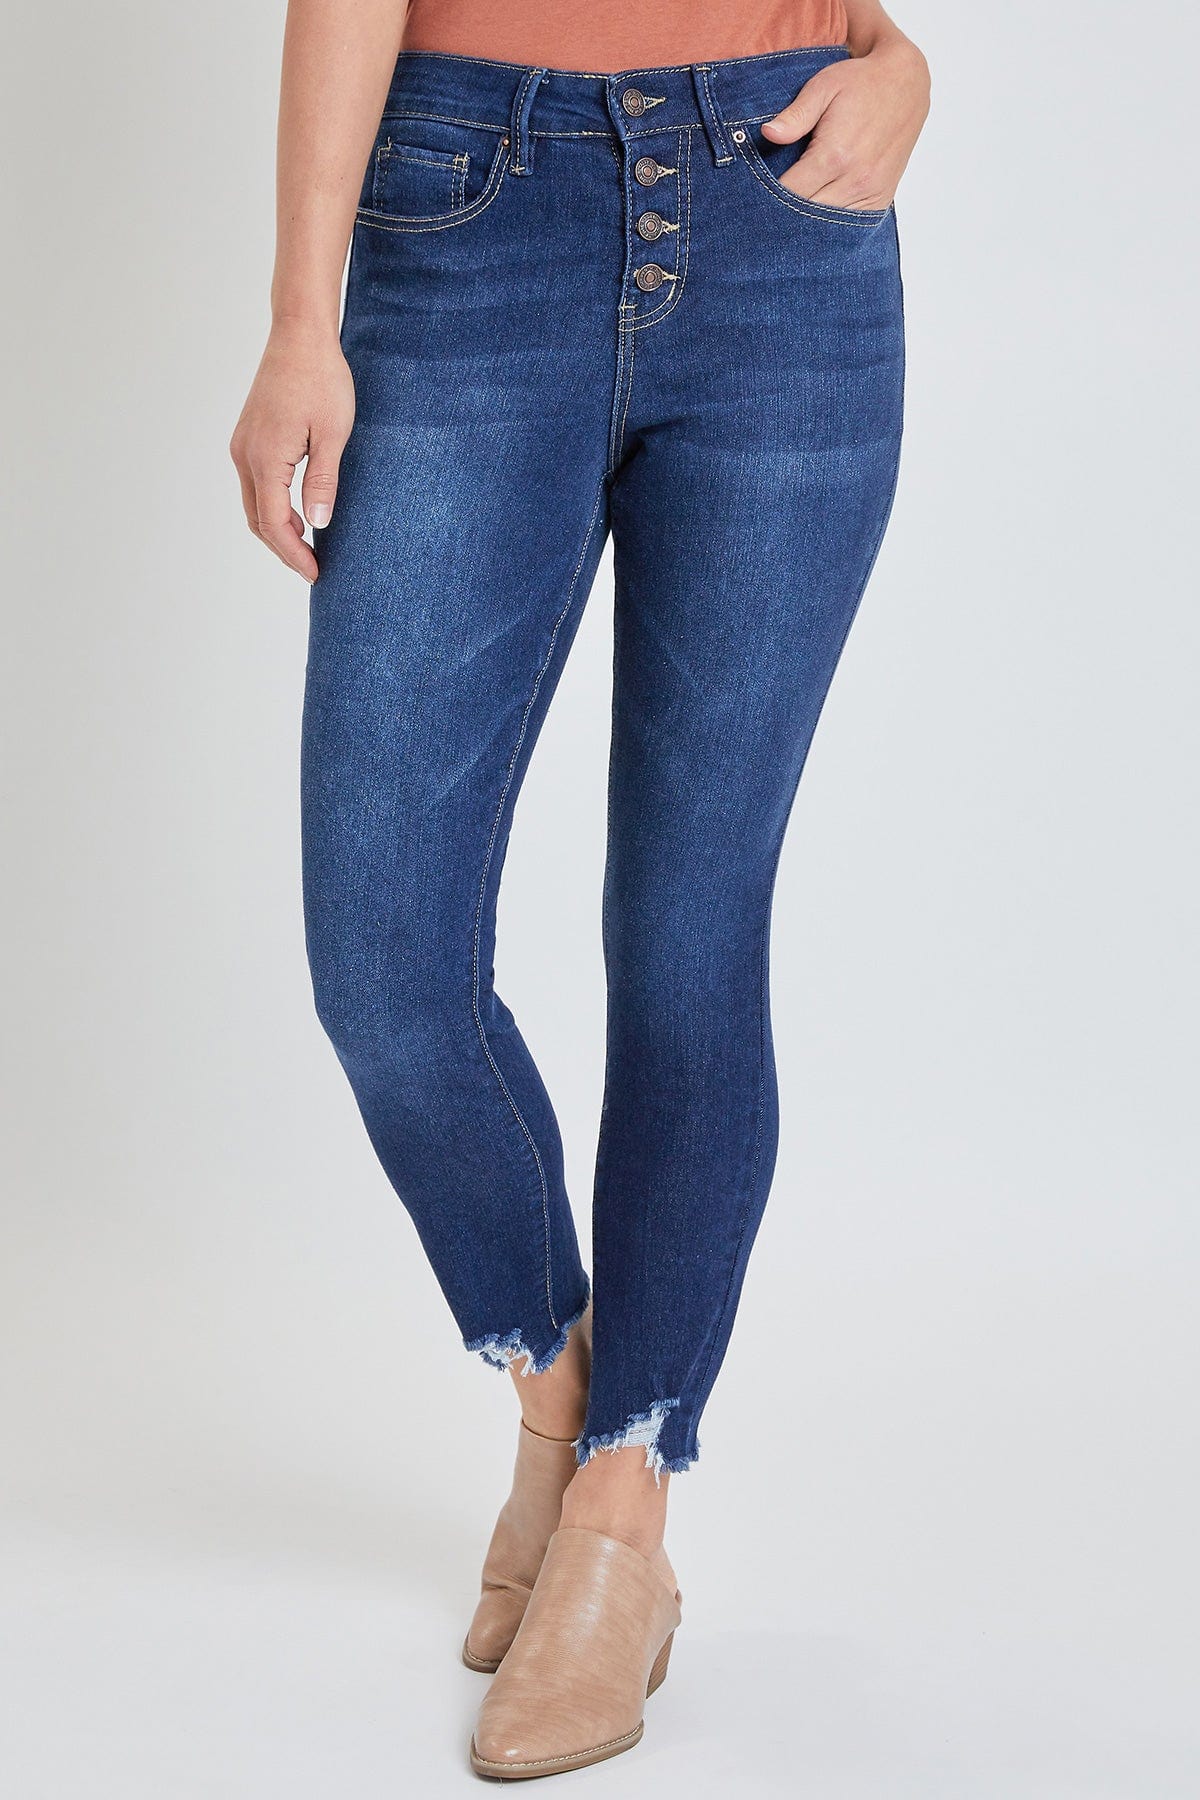 MISSY EXPOSED 4 BUTTON SKINNY ANKLE JEAN WITH RECYCLED FABRIC